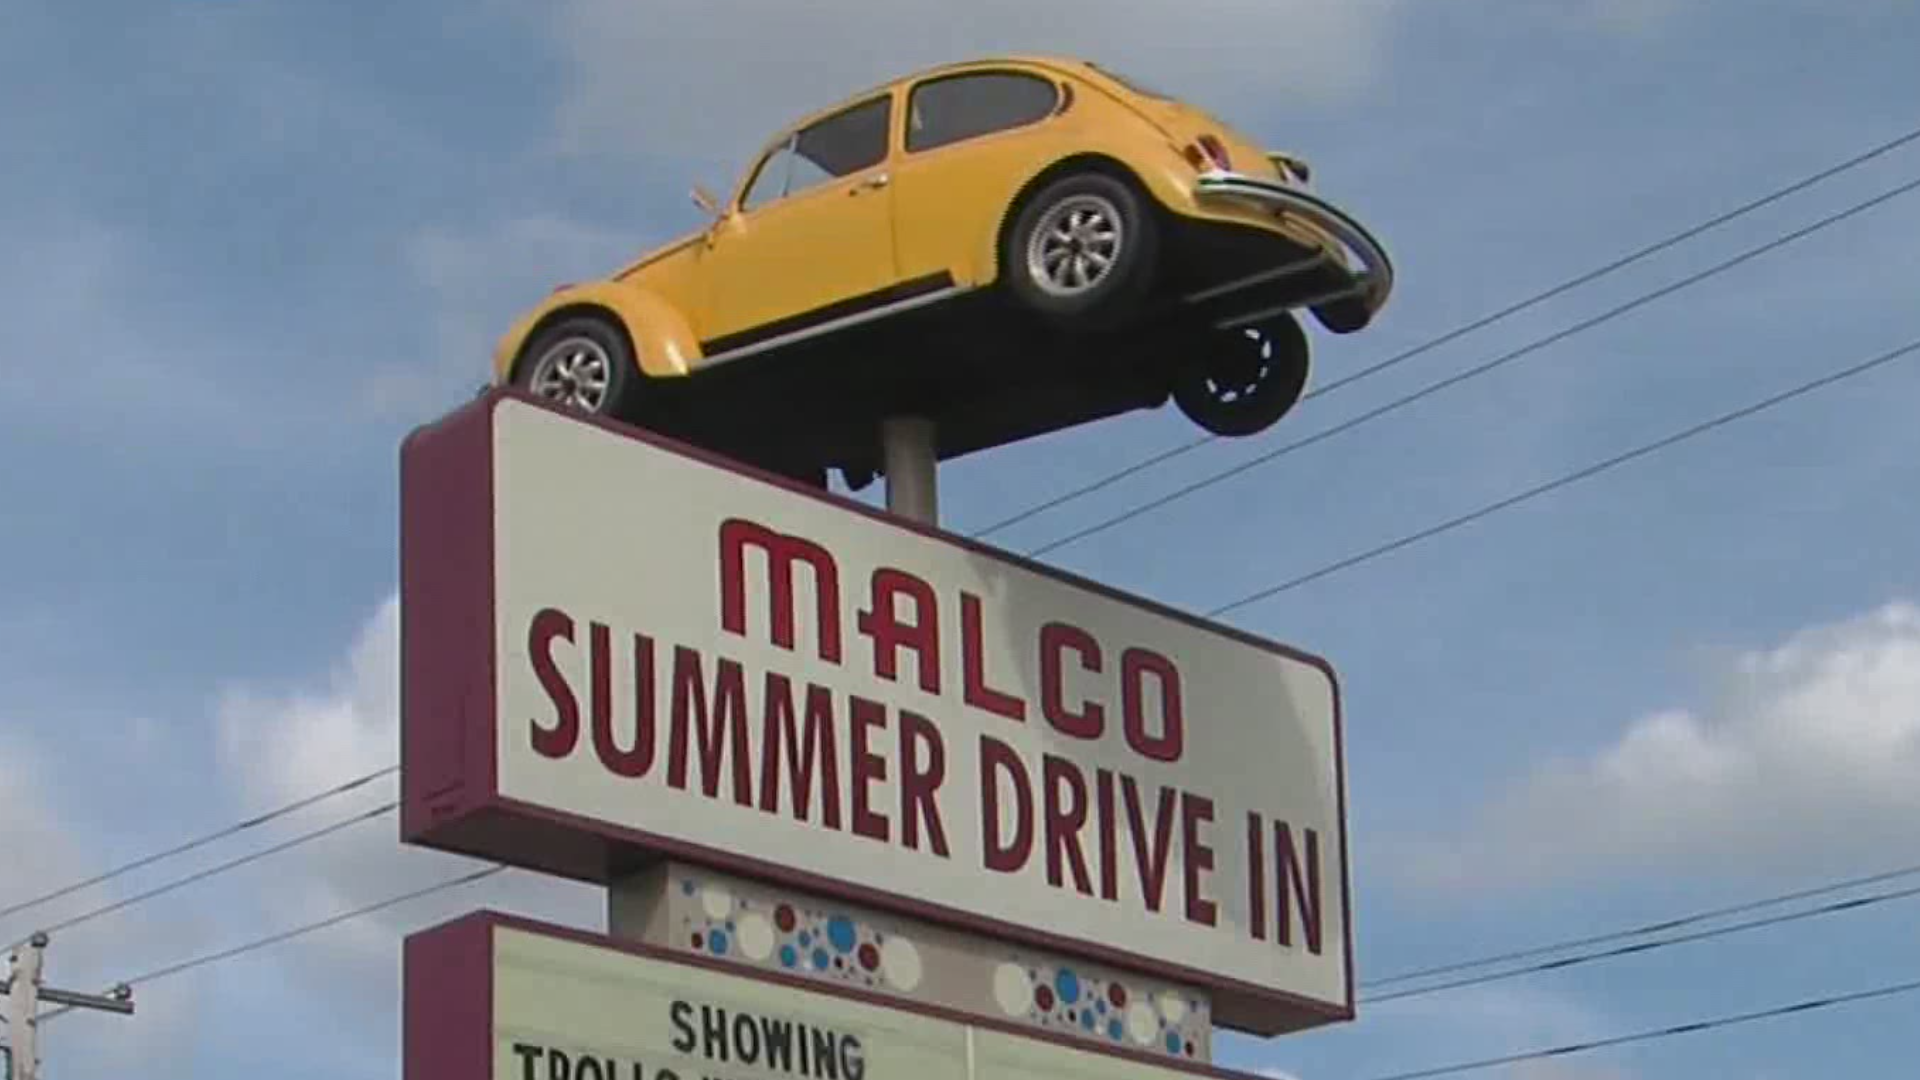 To give families a chance to get out of the house and enjoy themselves, Malco reopened its drive-in theatre with some health safety guidelines.